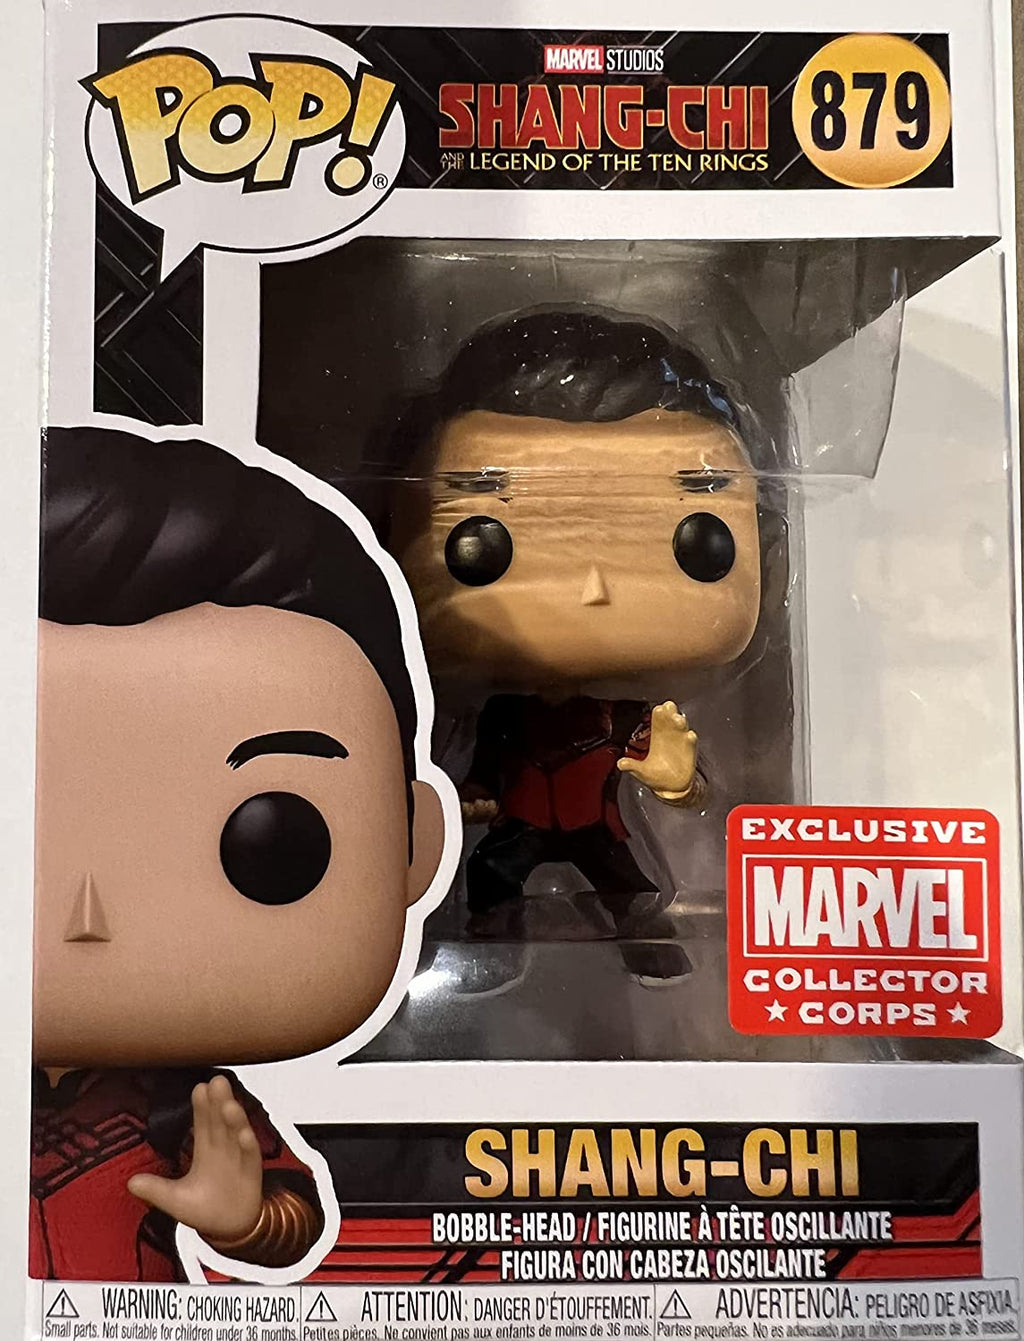 Pop Marvel Shang-Chi 3.75 Inch Action Figure Exclusive - Shang-Chi #879